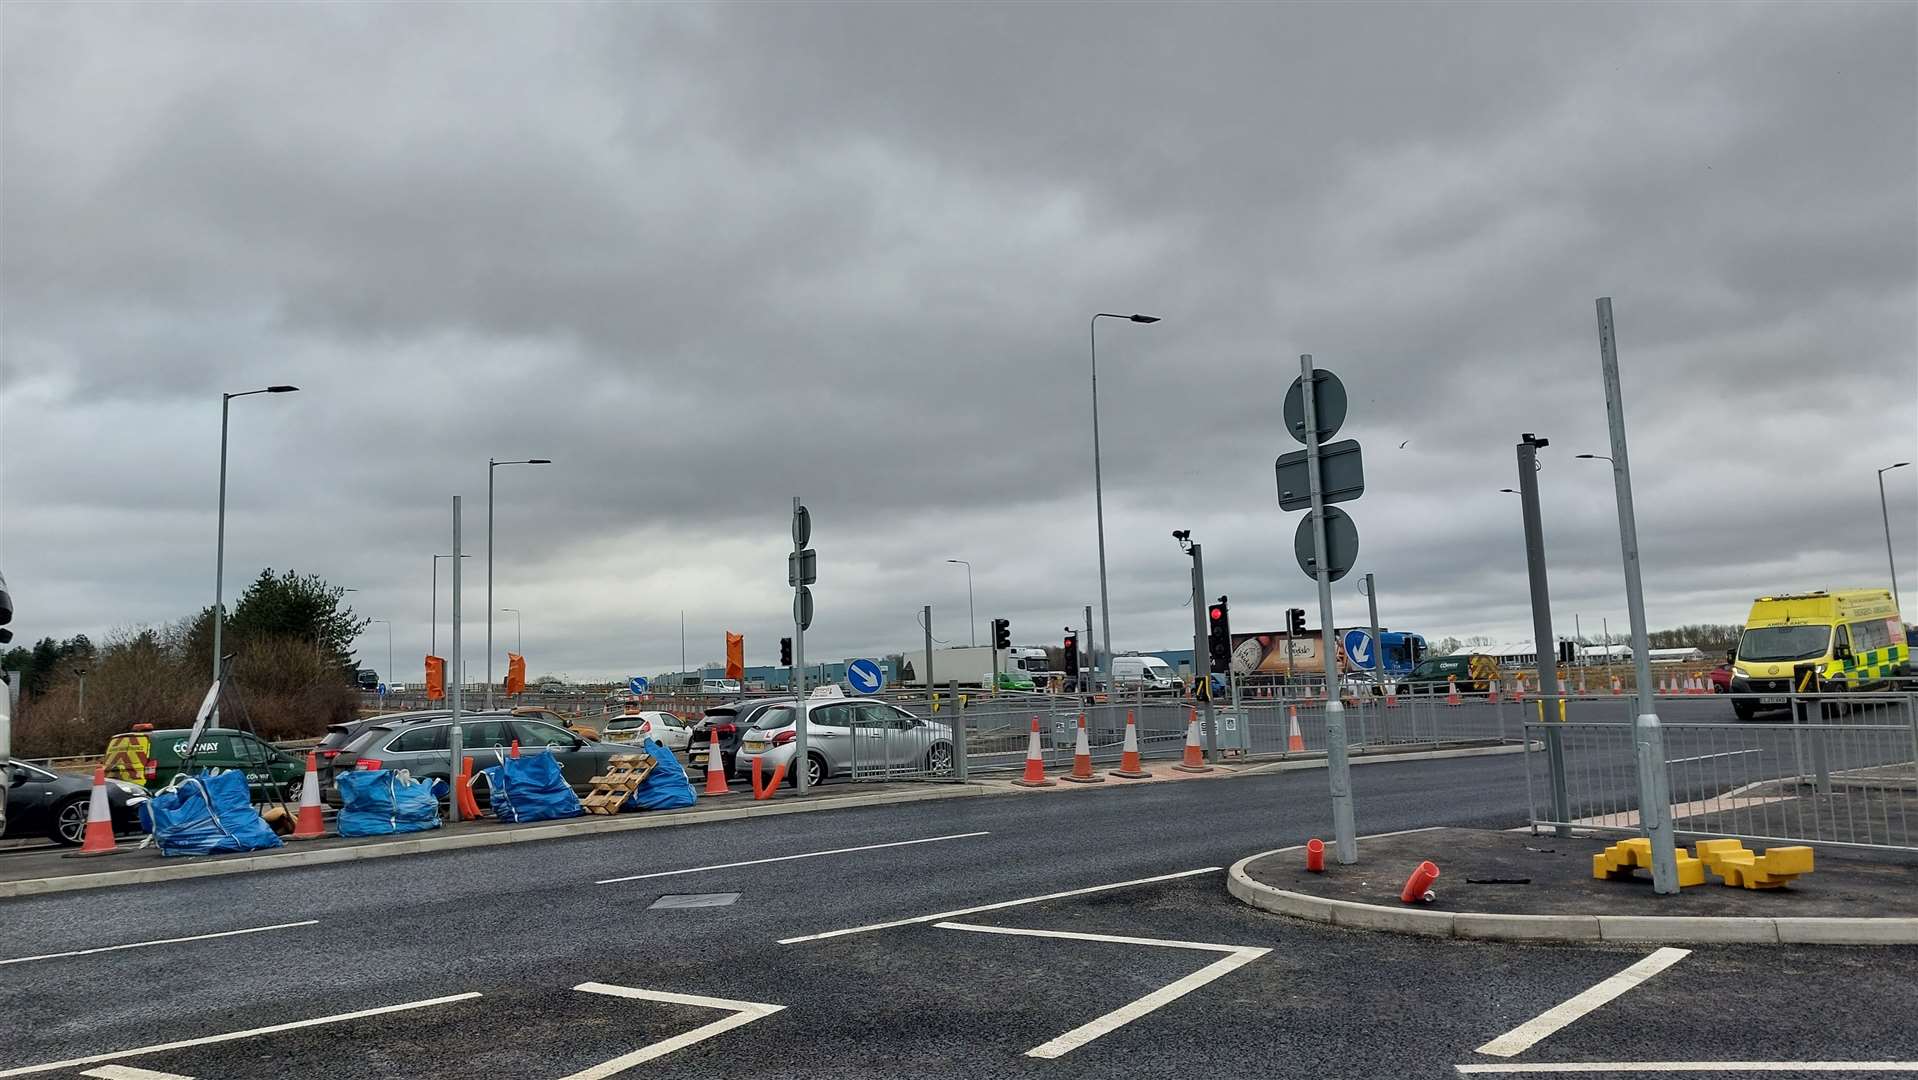 The roadworks, which have been going on for 10 months, are due to finish this month